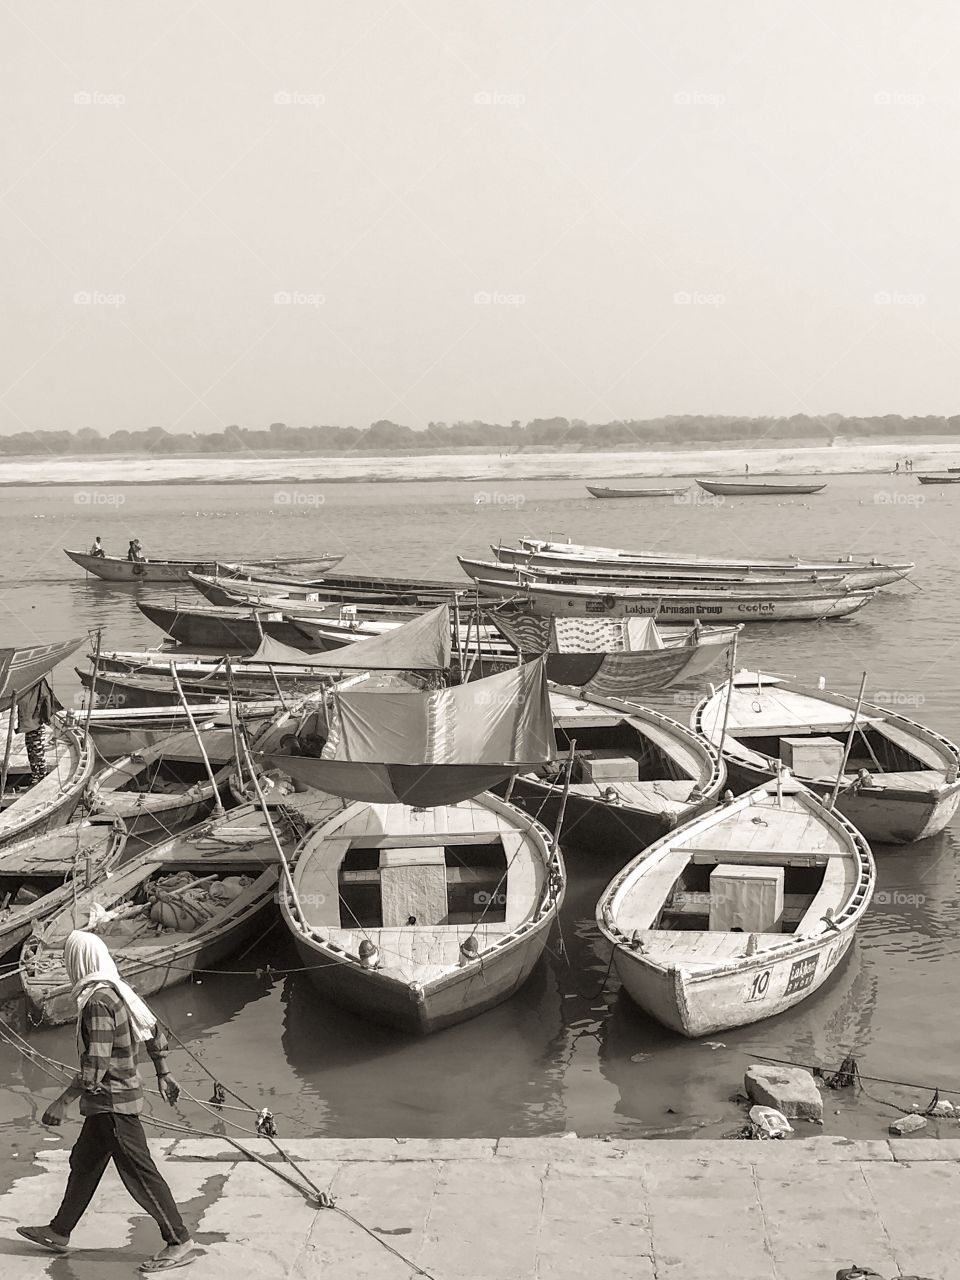 Empty boats waiting for passengers to ride on the mighty Ganges in the ancient city of Varanasi, India.